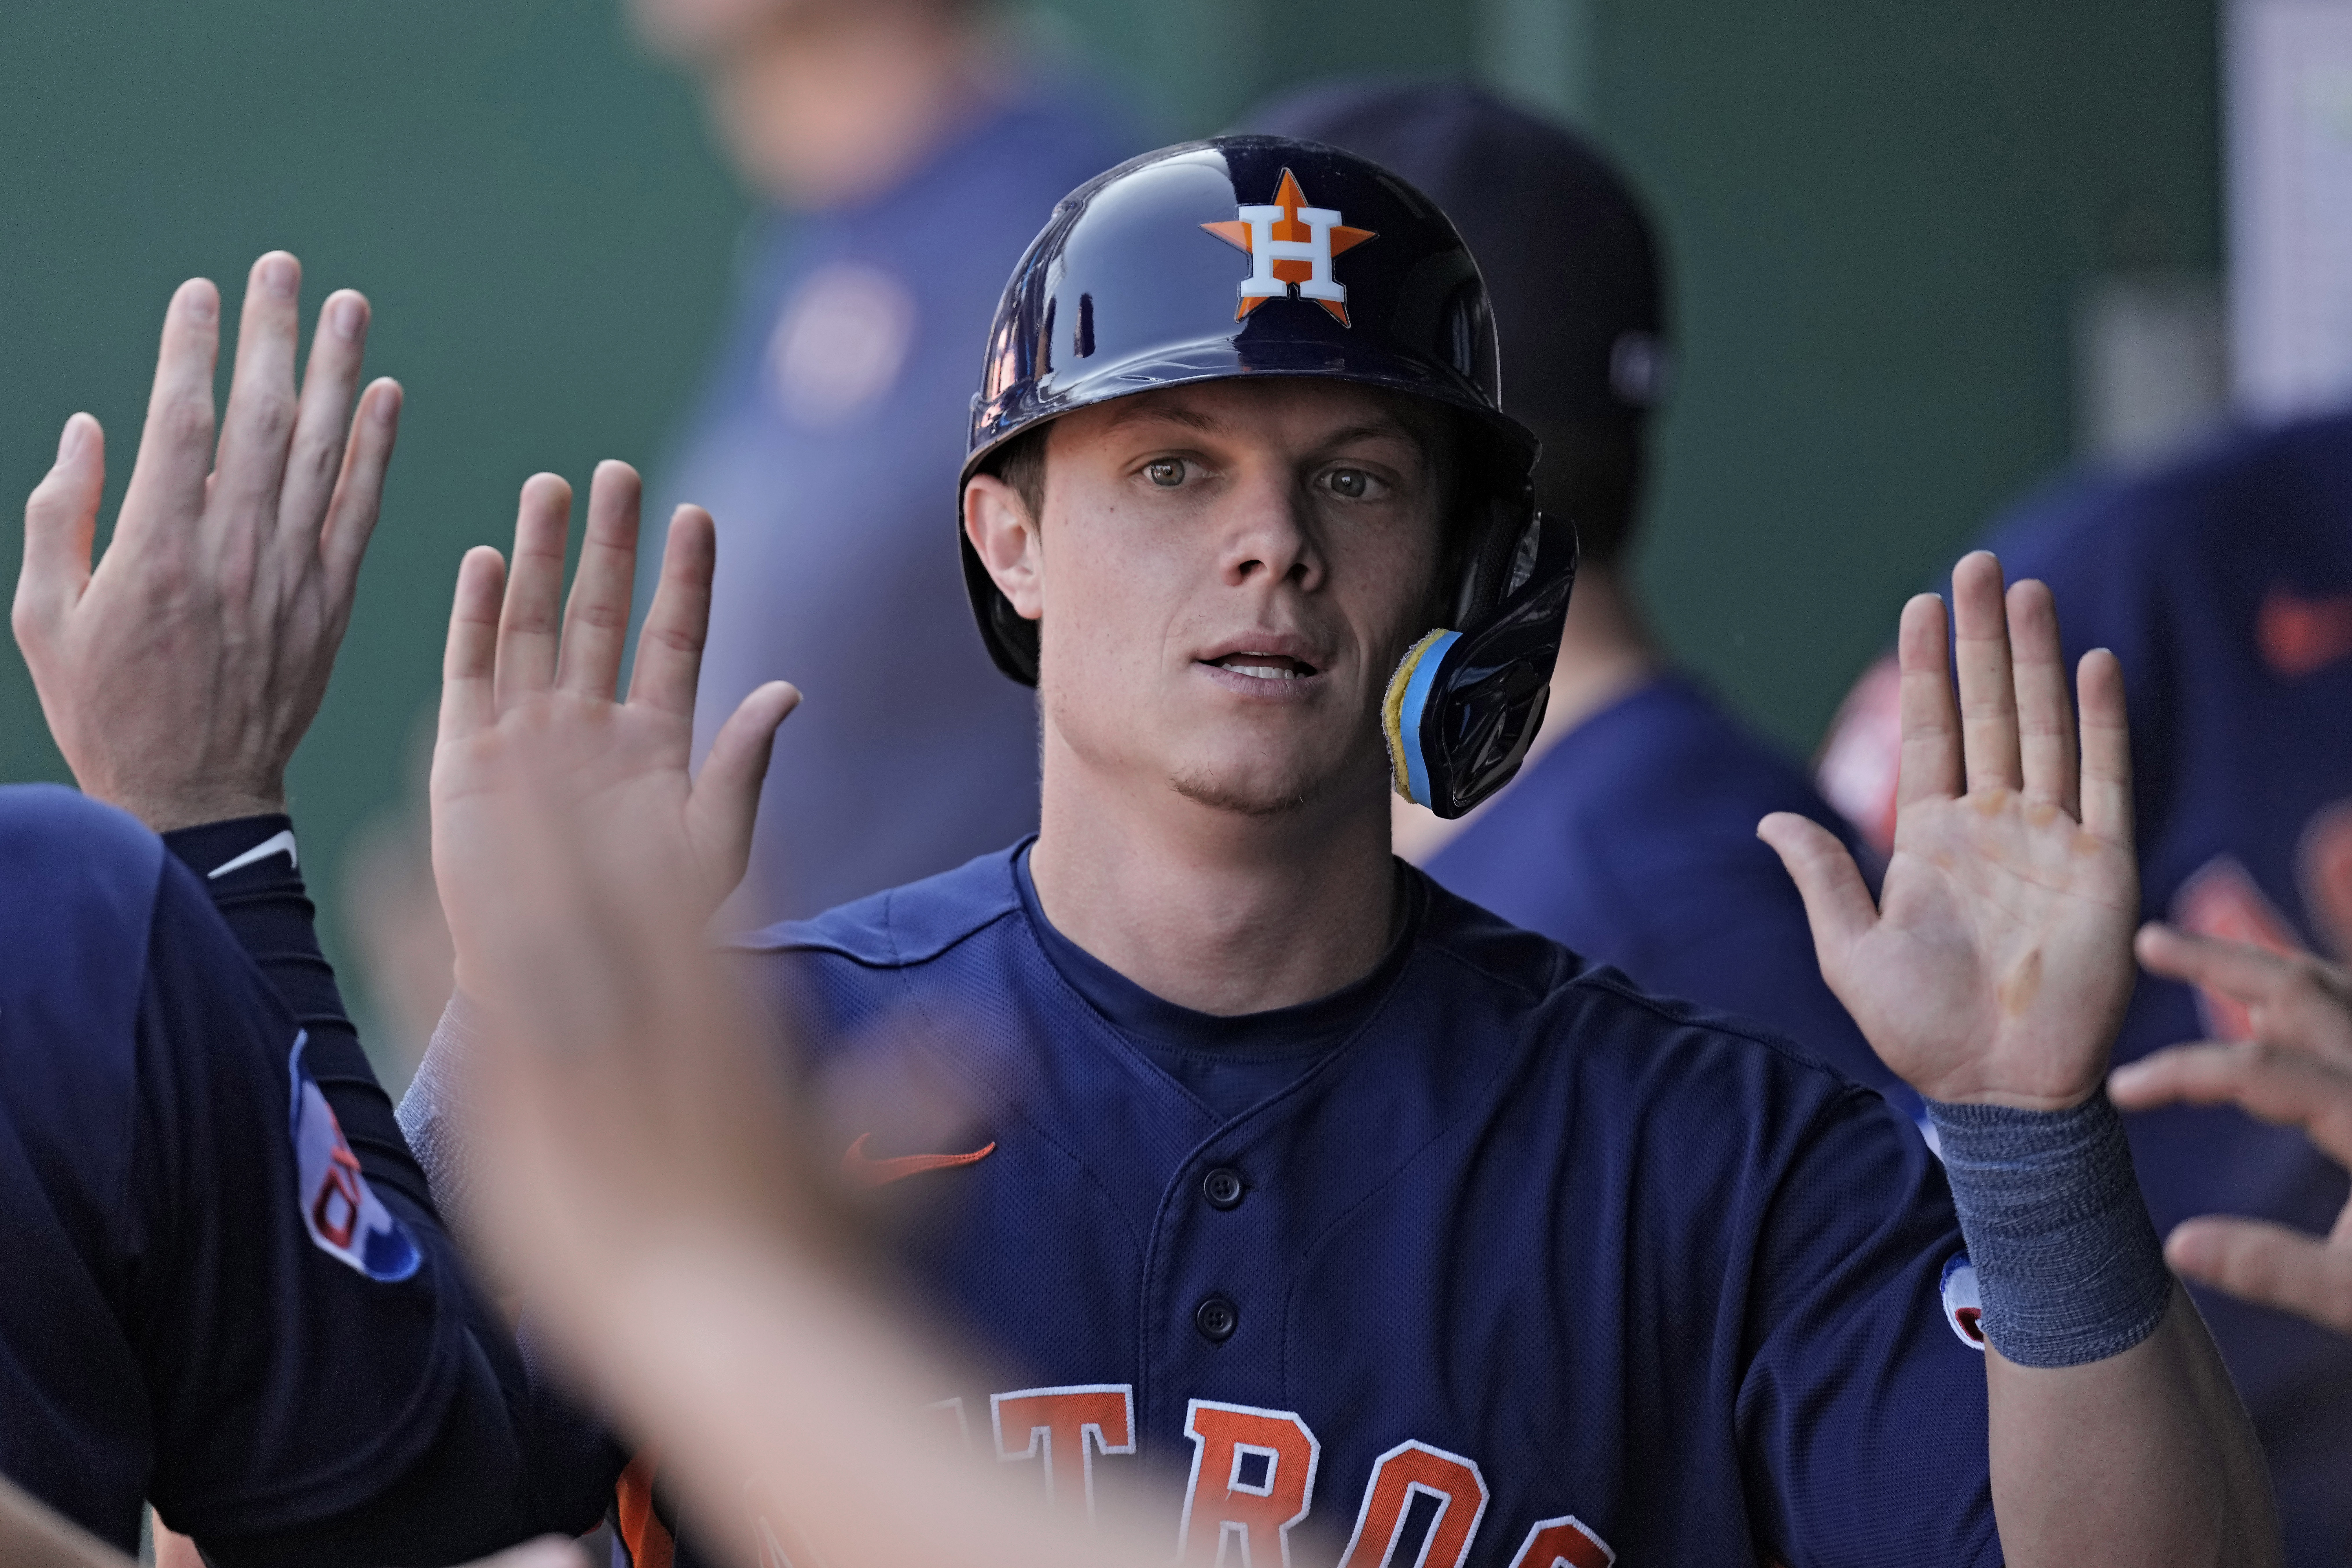 Astros avoid sweep with win over Royals, gain game in AL West over